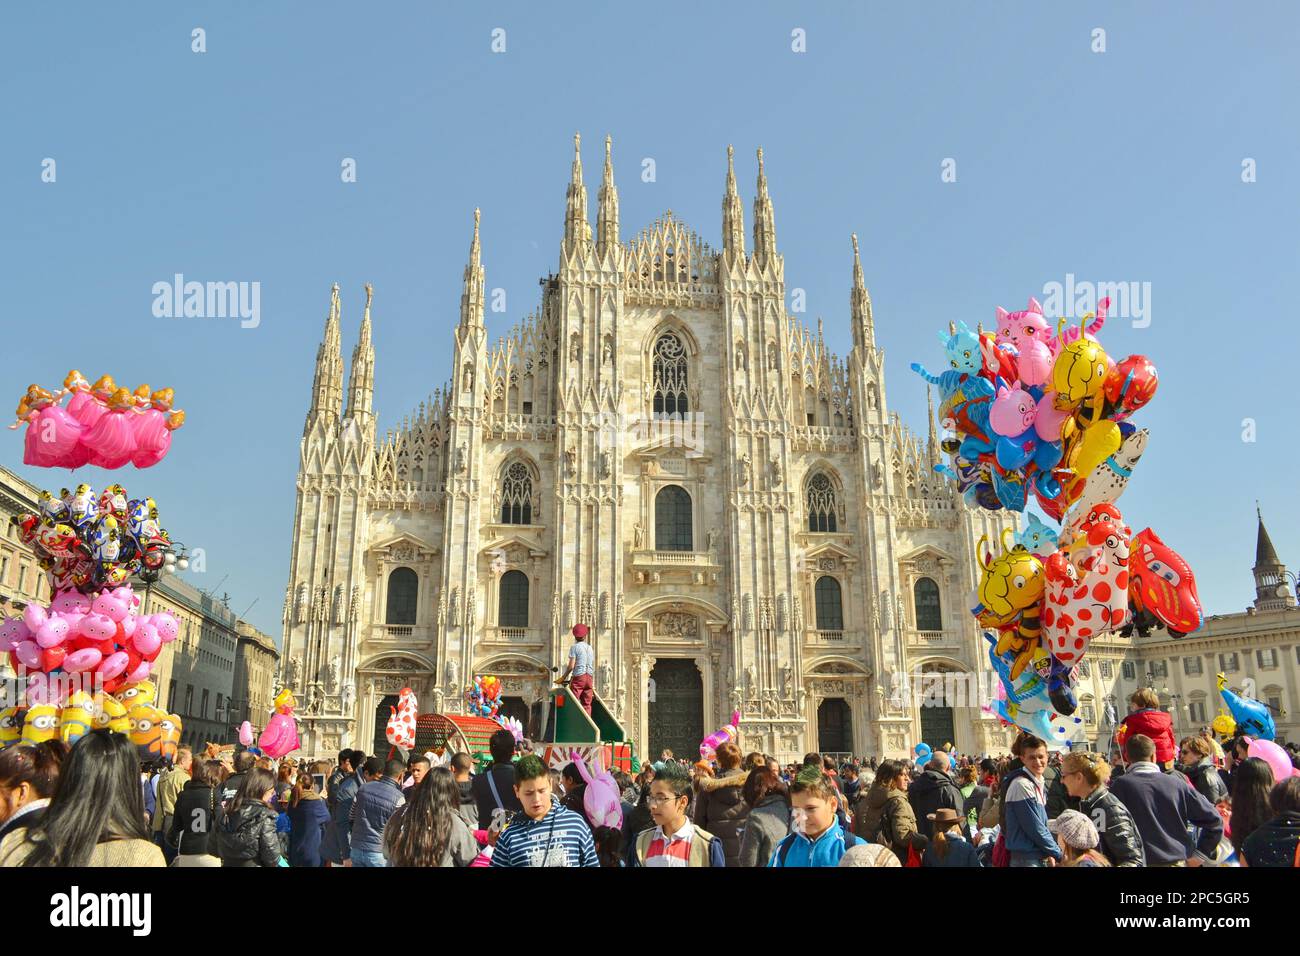 People celebrating Carnival in Duomo square of Milan in front of the famous medieval cathedral. Happy men and women and colorful balloons. Stock Photo